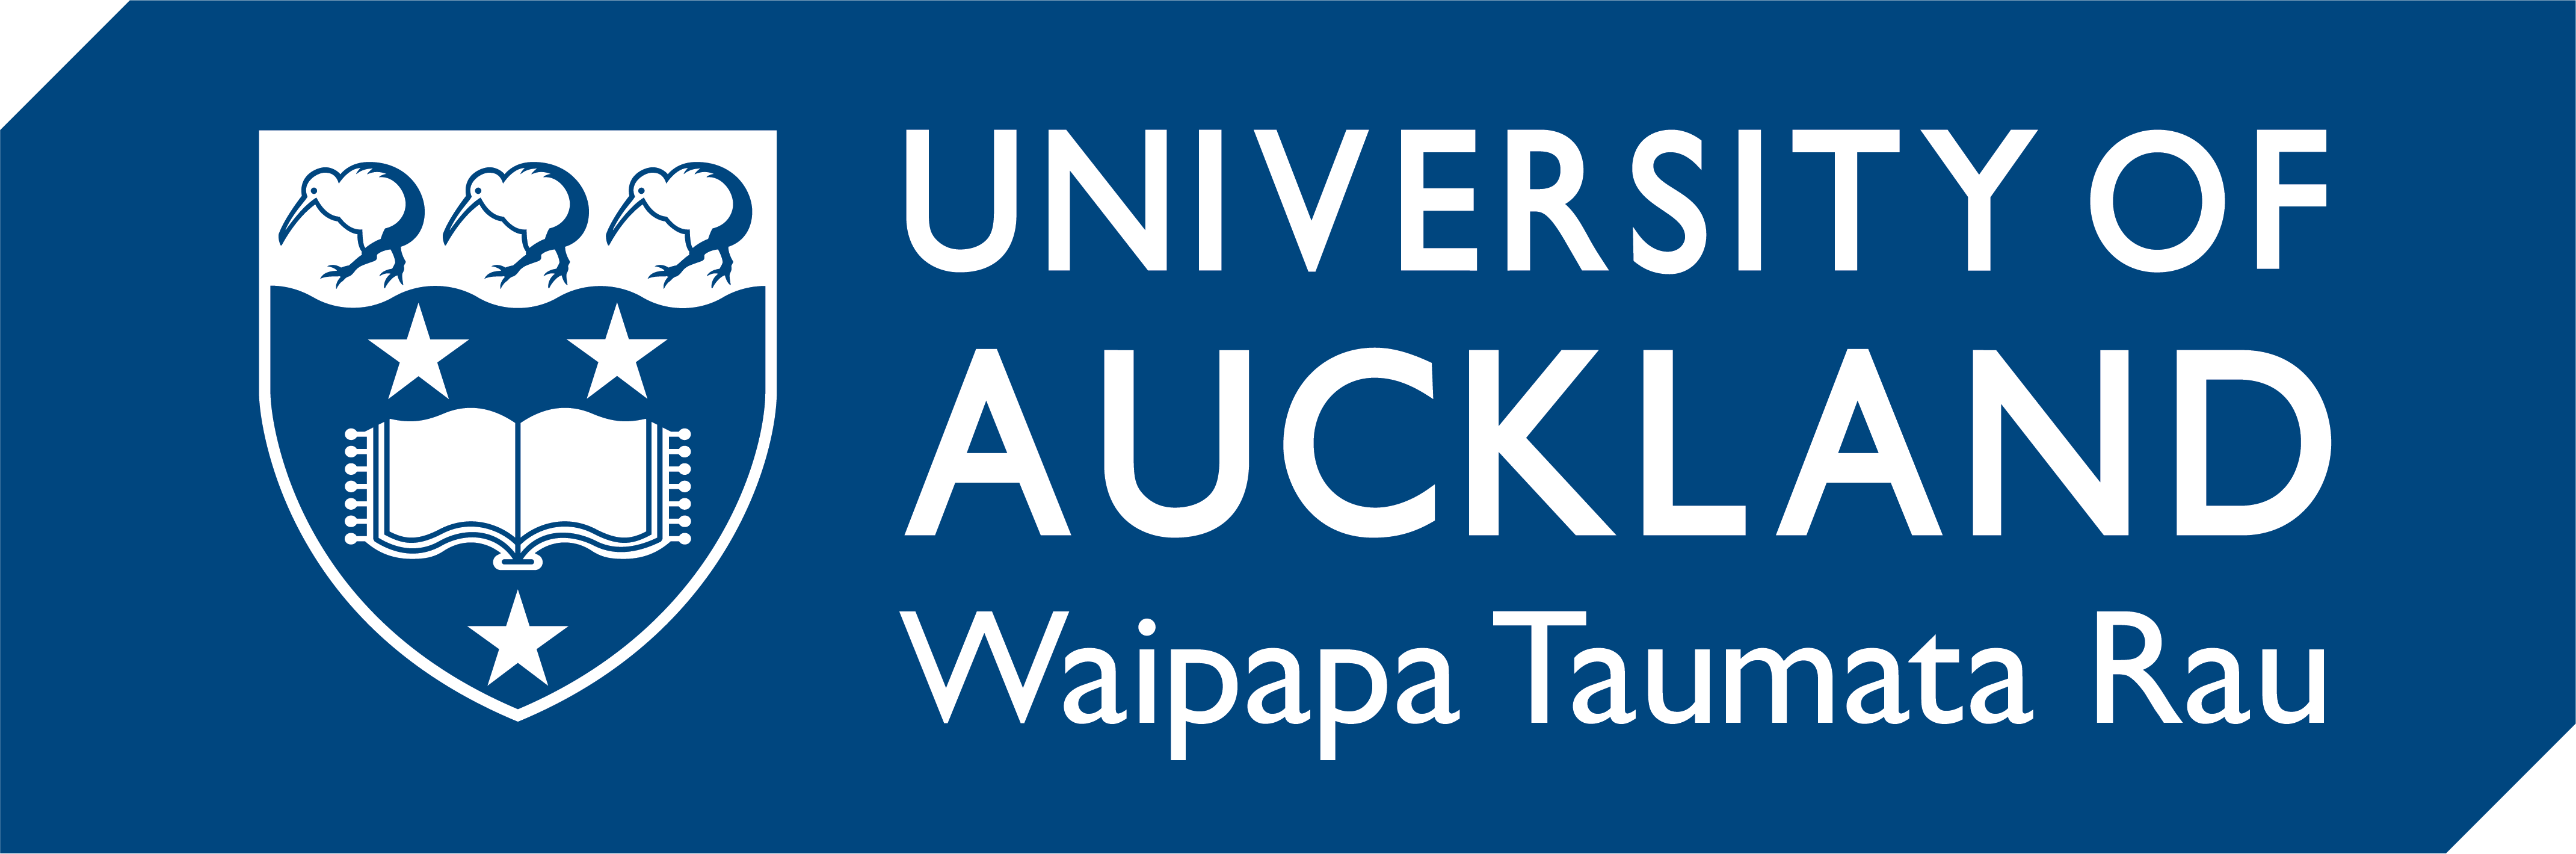 Centre for eResearch, University of Auckland